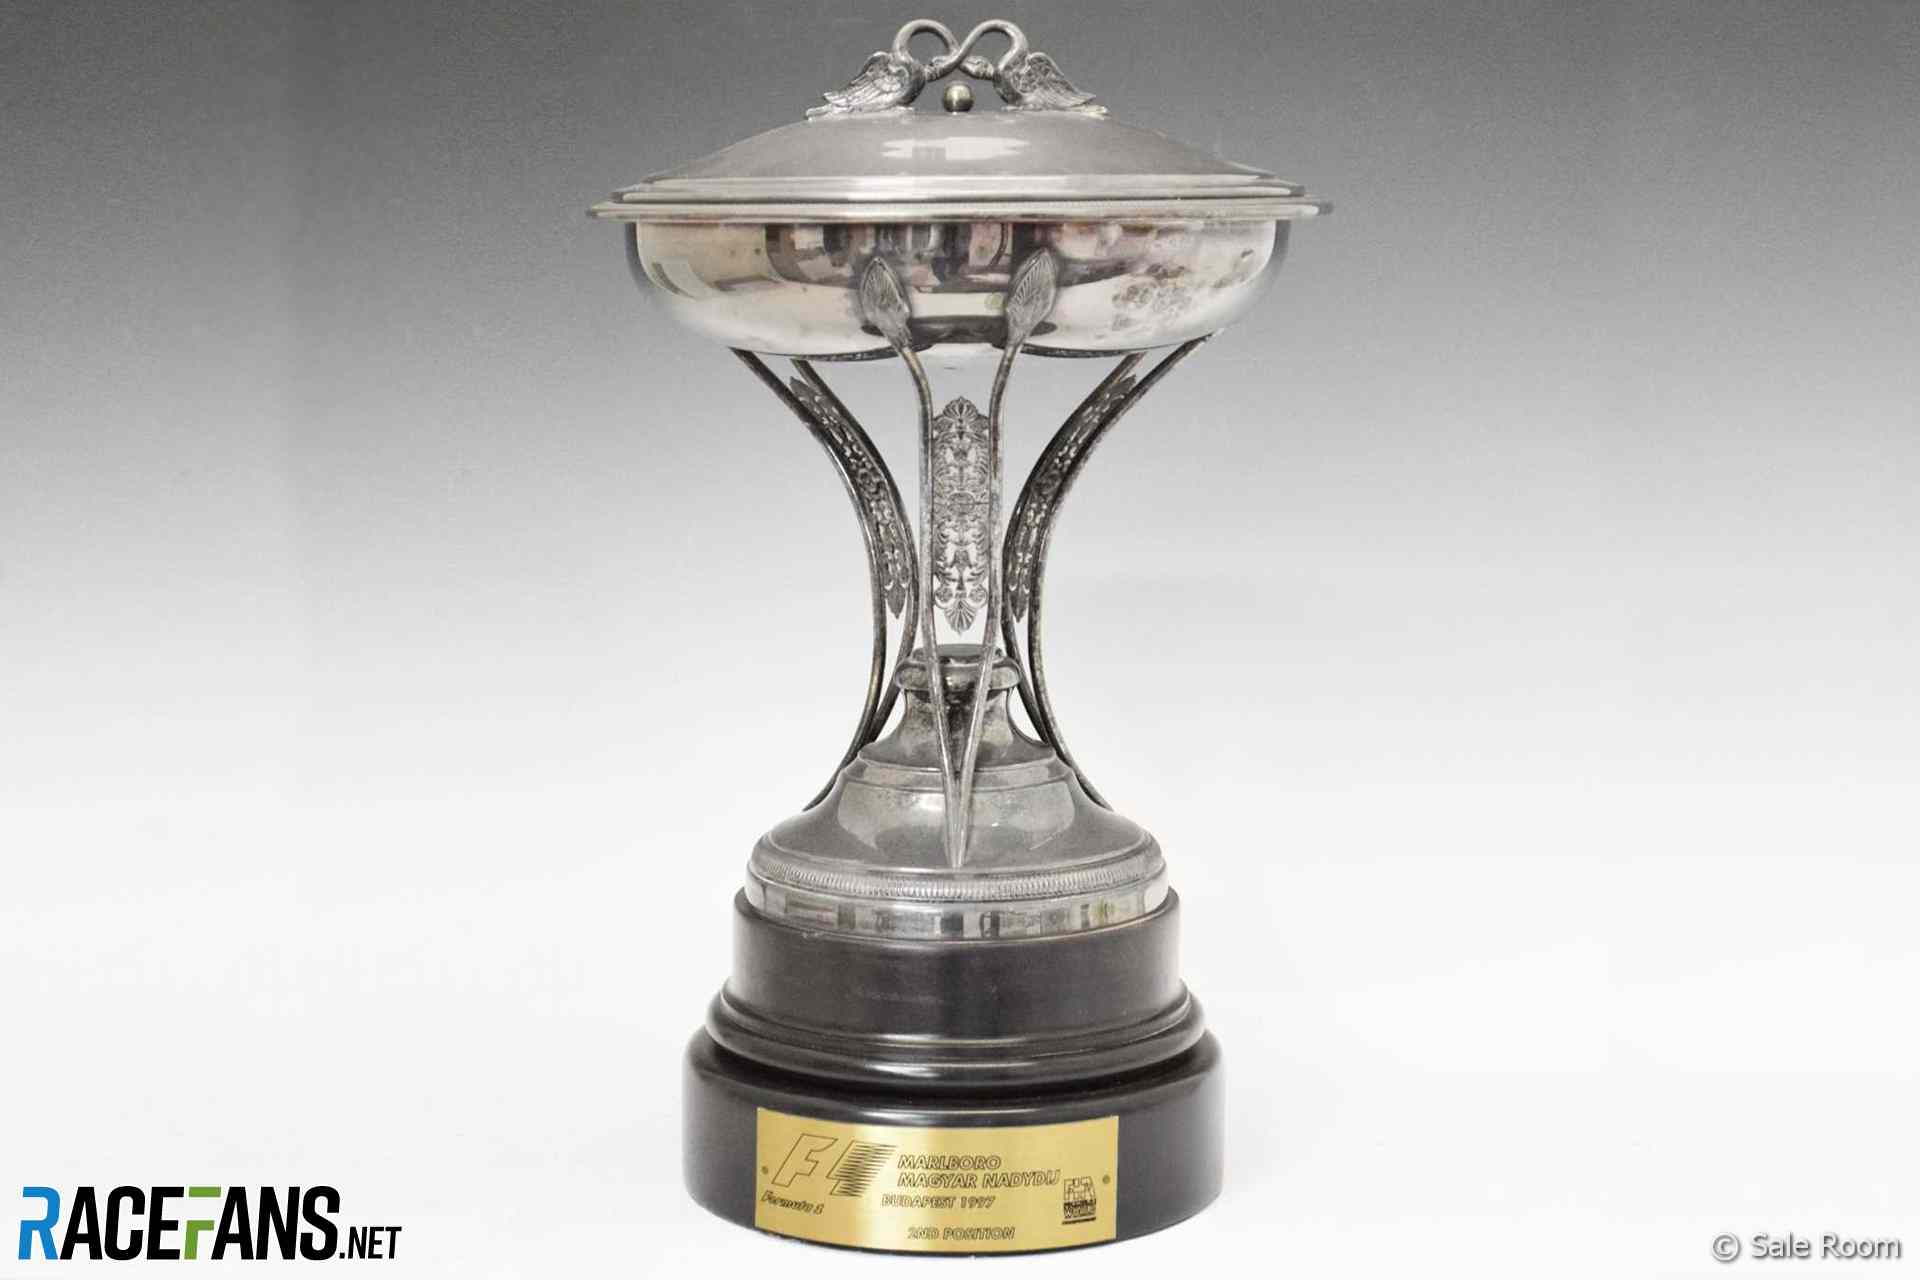 1997 Hungarian Grand Prix second place trophy